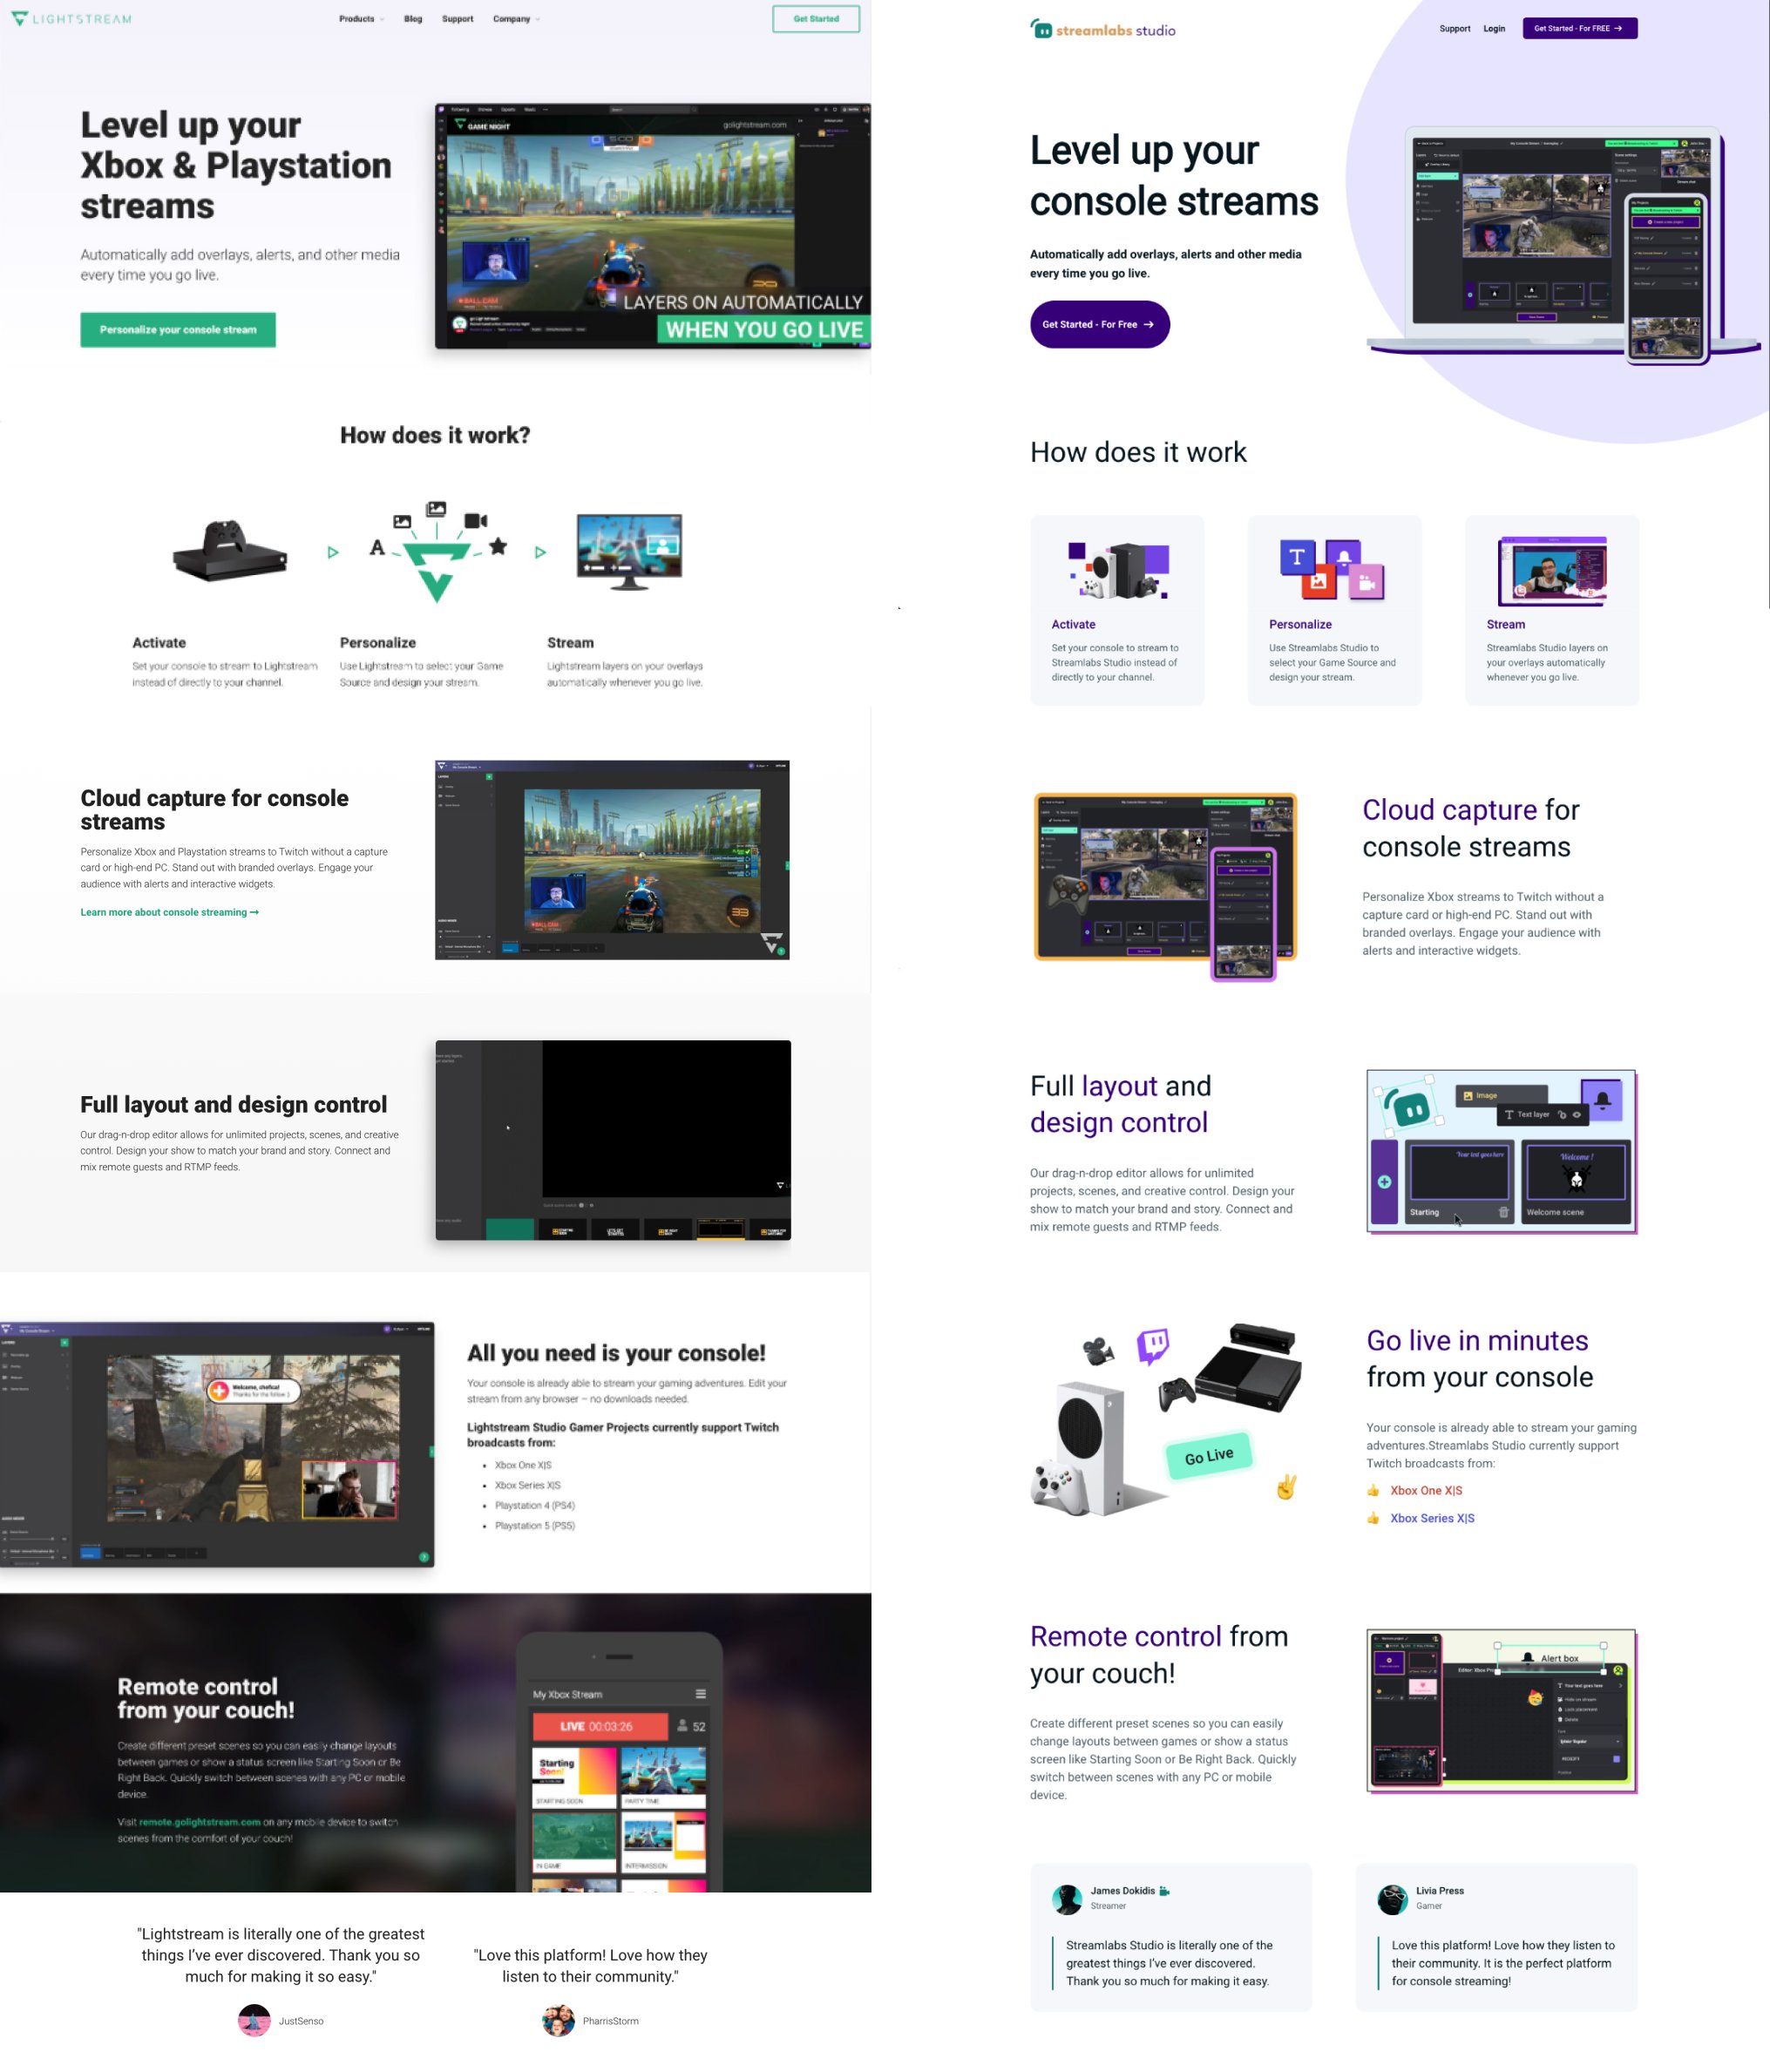 Image of the difference between Streamlabs info and Lightstreams info. Both of them mentioning leveling up your console streams, both of them mentioning how it works, cloud capture, full layout and design control, going live in minutes, using a phone or tablet as a remote control, and even the reviews are the same the only difference is the name.